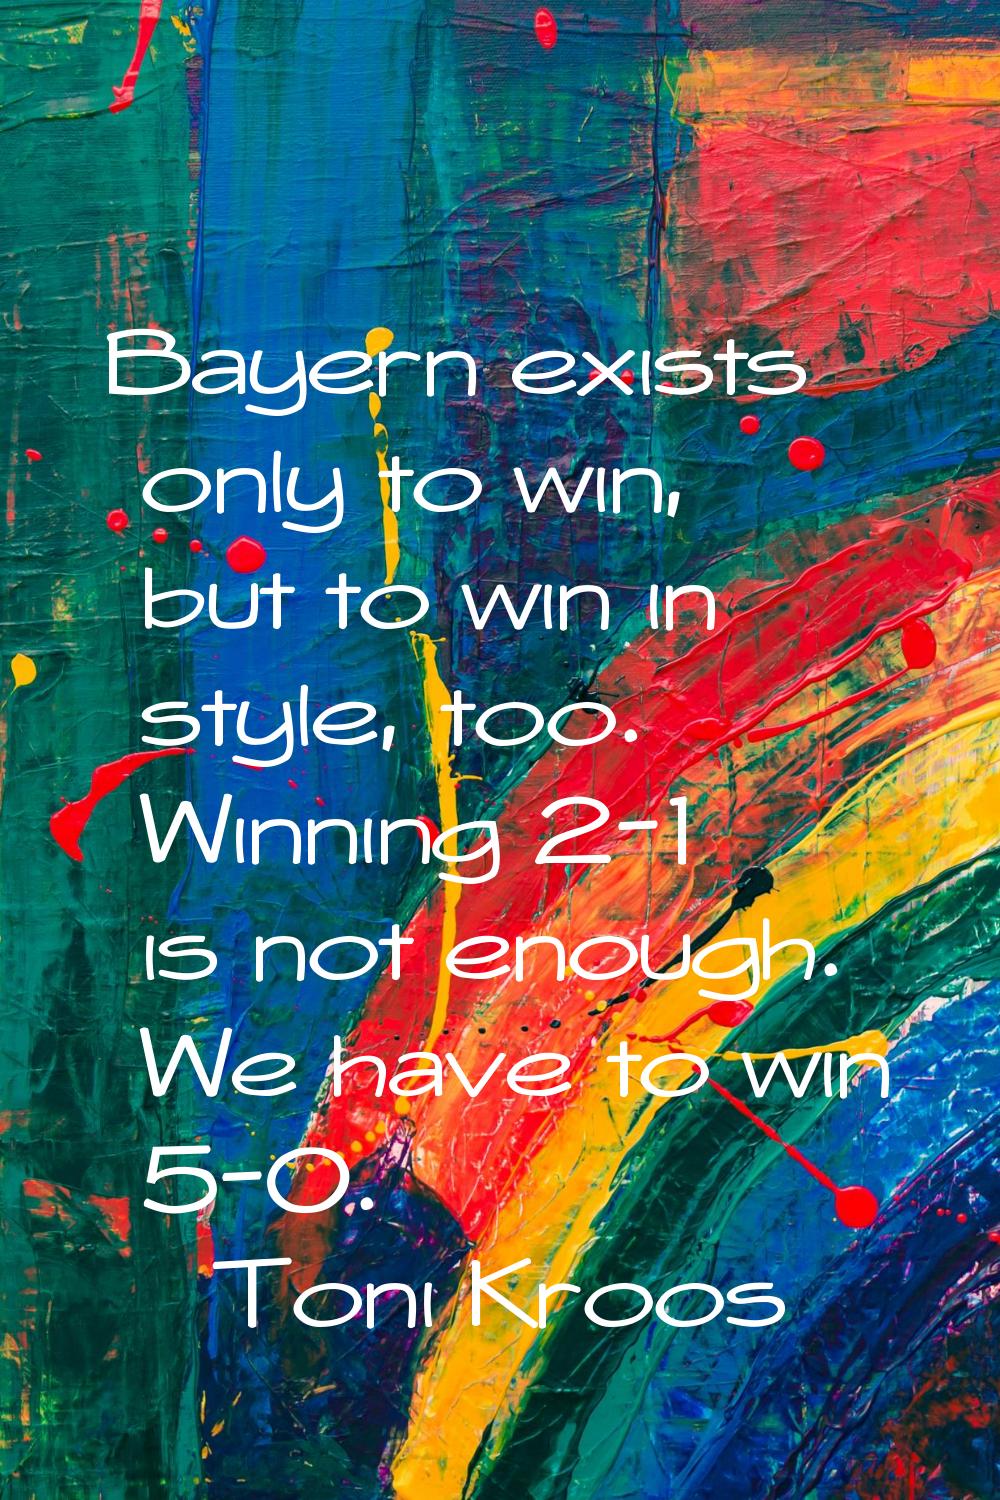 Bayern exists only to win, but to win in style, too. Winning 2-1 is not enough. We have to win 5-0.